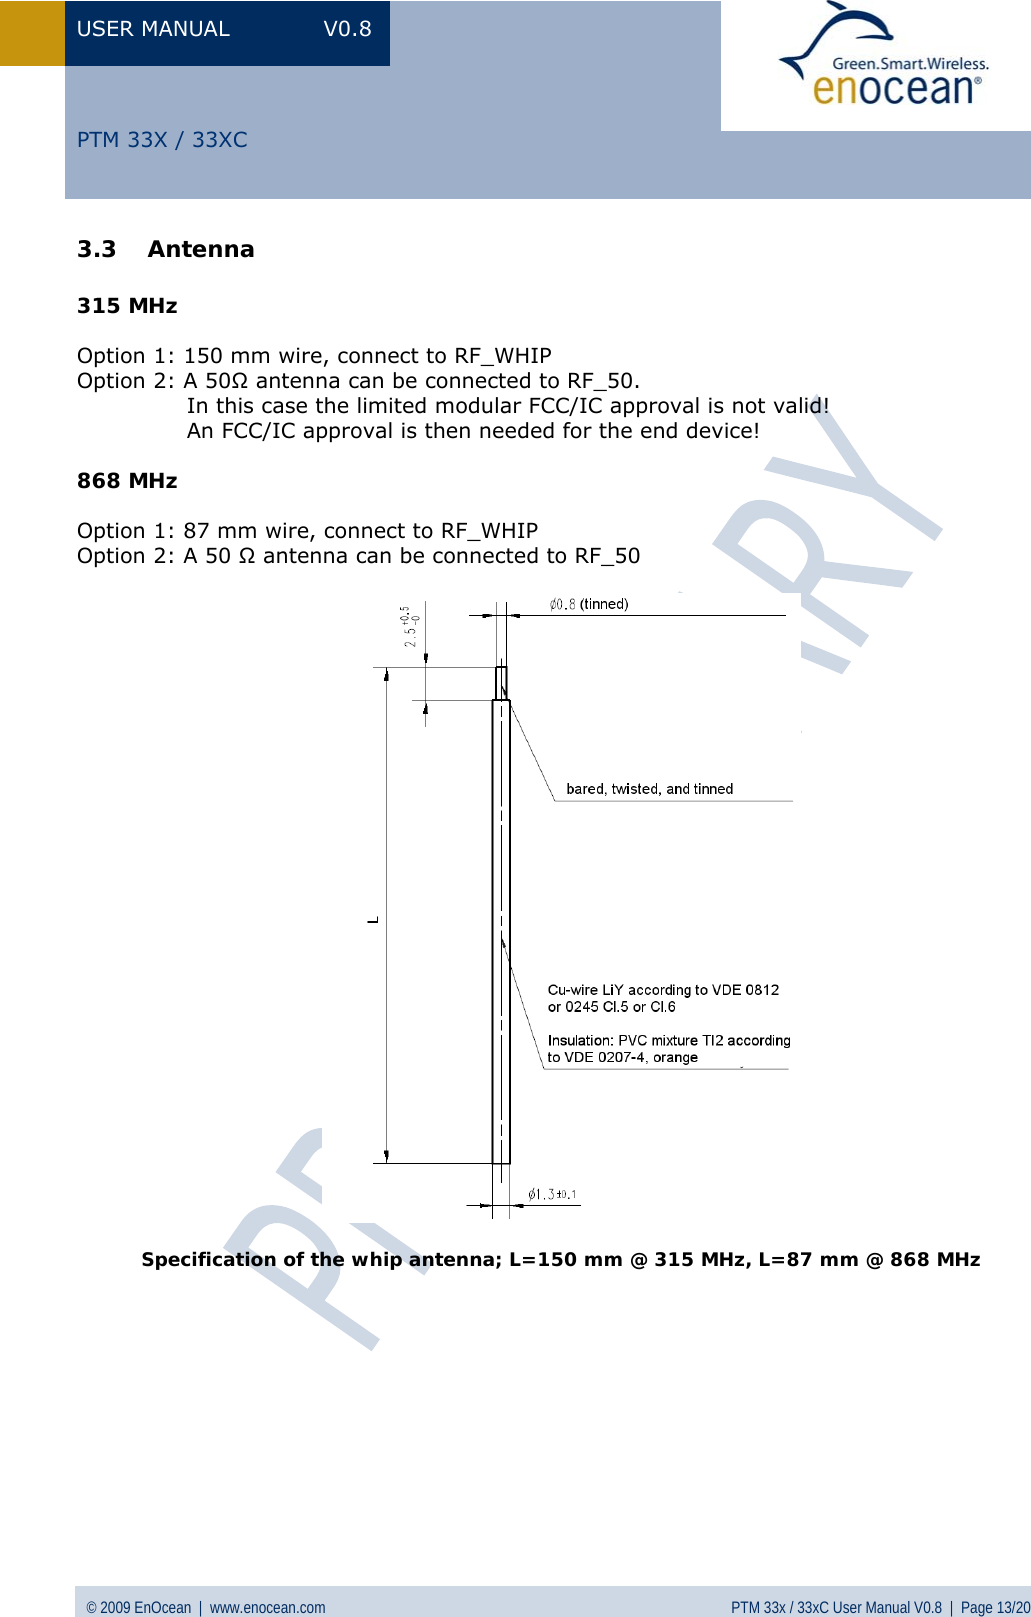 USER MANUAL V0.8 © 2009 EnOcean  |  www.enocean.com  PTM 33x / 33xC User Manual V0.8  |  Page 13/20   PTM 33X / 33XC 3.3 Antenna   315 MHz  Option 1: 150 mm wire, connect to RF_WHIP Option 2: A 50Ω antenna can be connected to RF_50.                 In this case the limited modular FCC/IC approval is not valid!                An FCC/IC approval is then needed for the end device!  868 MHz  Option 1: 87 mm wire, connect to RF_WHIP Option 2: A 50 Ω antenna can be connected to RF_50    Specification of the whip antenna; L=150 mm @ 315 MHz, L=87 mm @ 868 MHz 